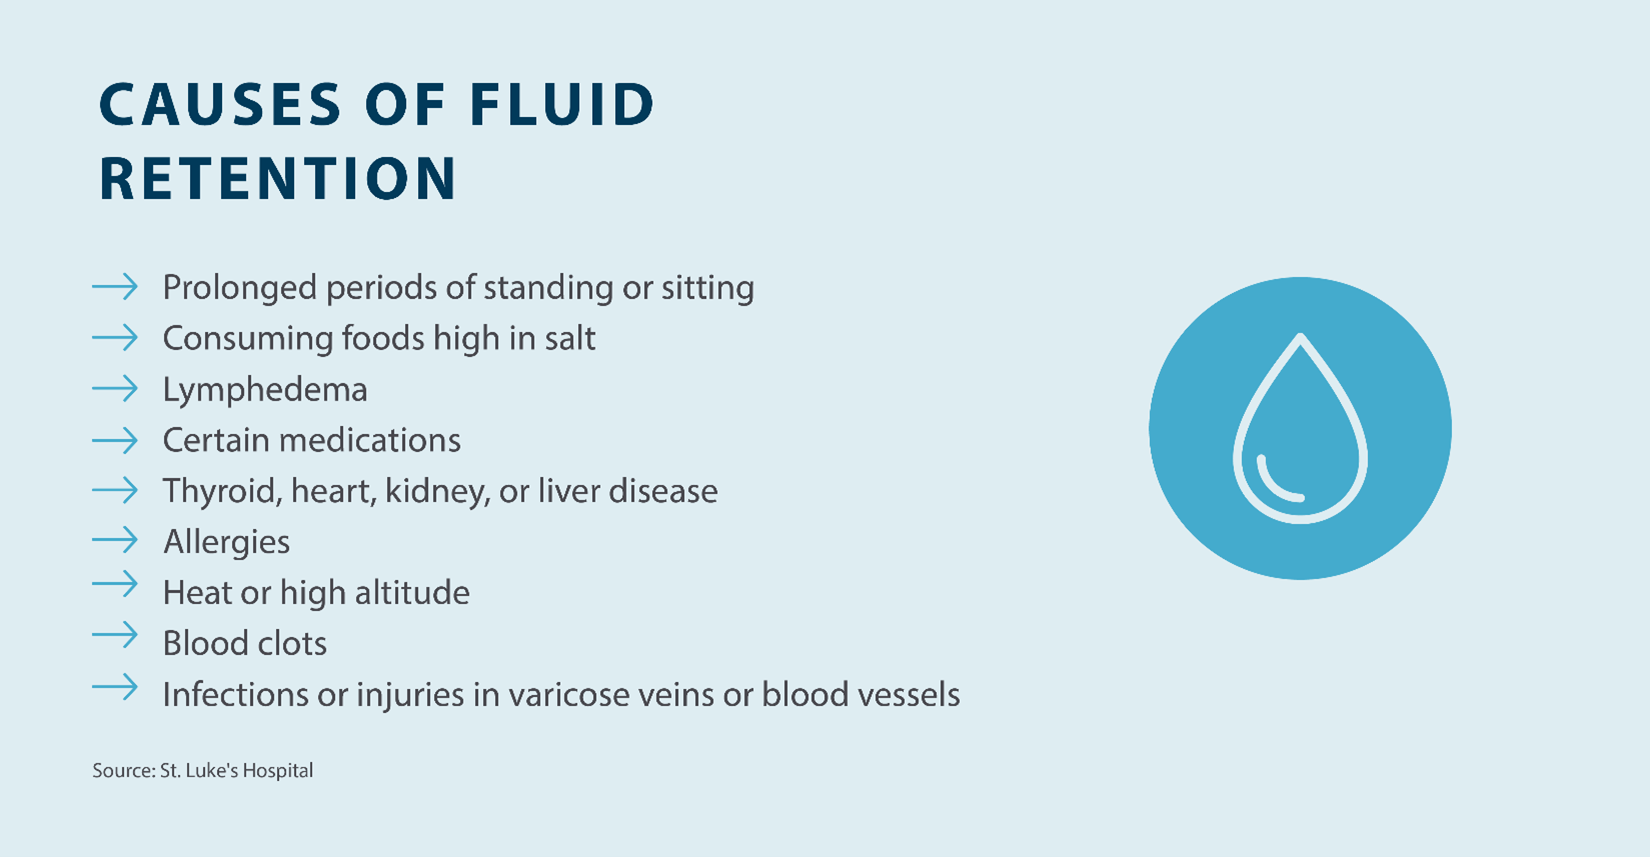 causes of fluid retention; prolonged periods of standing or sitting, consuming foods high in salt, lymphedema, certain medications, thyroid, heart, kidney, or liver disease, allergies, heat or high altitude, blood clots, infections or injuries in varicose veins or blood vessels Source St. Luke's Hospital